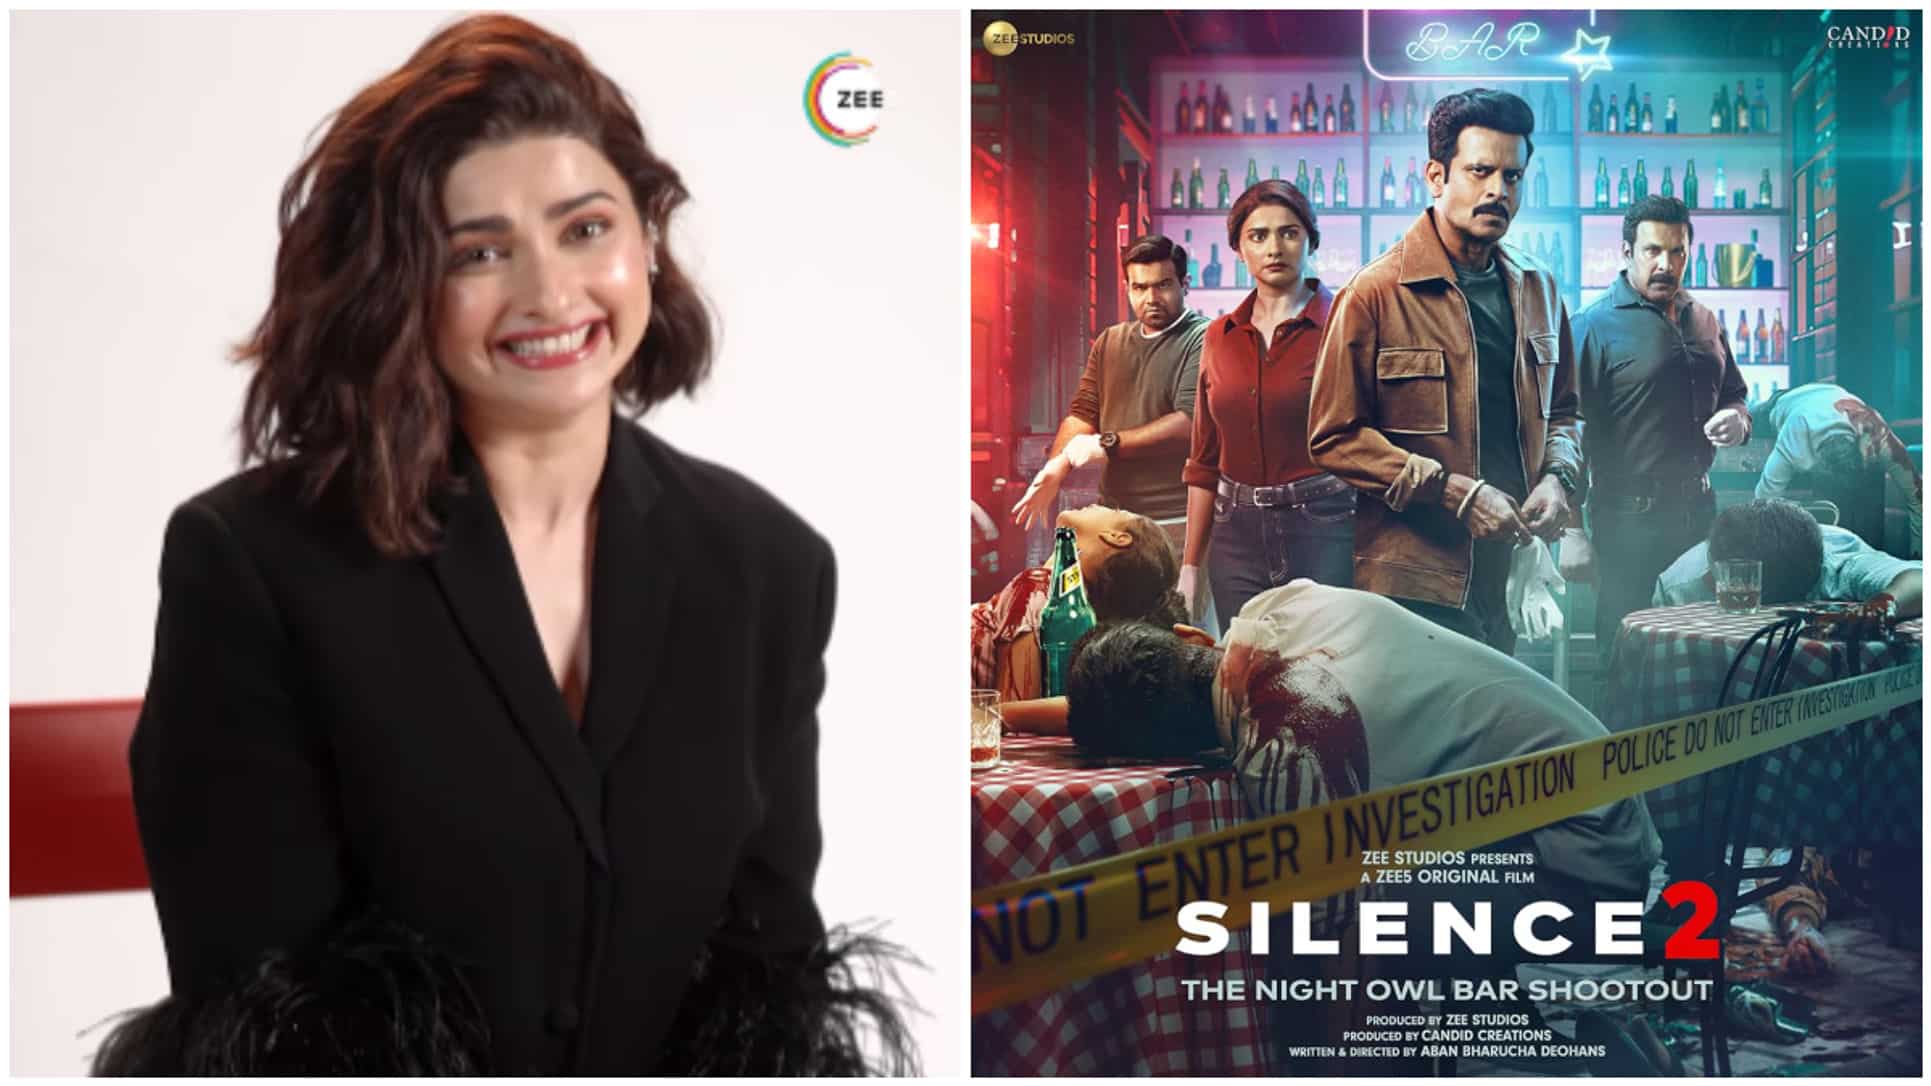 https://www.mobilemasala.com/movies/Silence-2-actors-Prachi-Desai-Vaquar-Shaikh-fight-it-out-for-who-loves-Manoj-Bajpayee-more-find-out-i263042